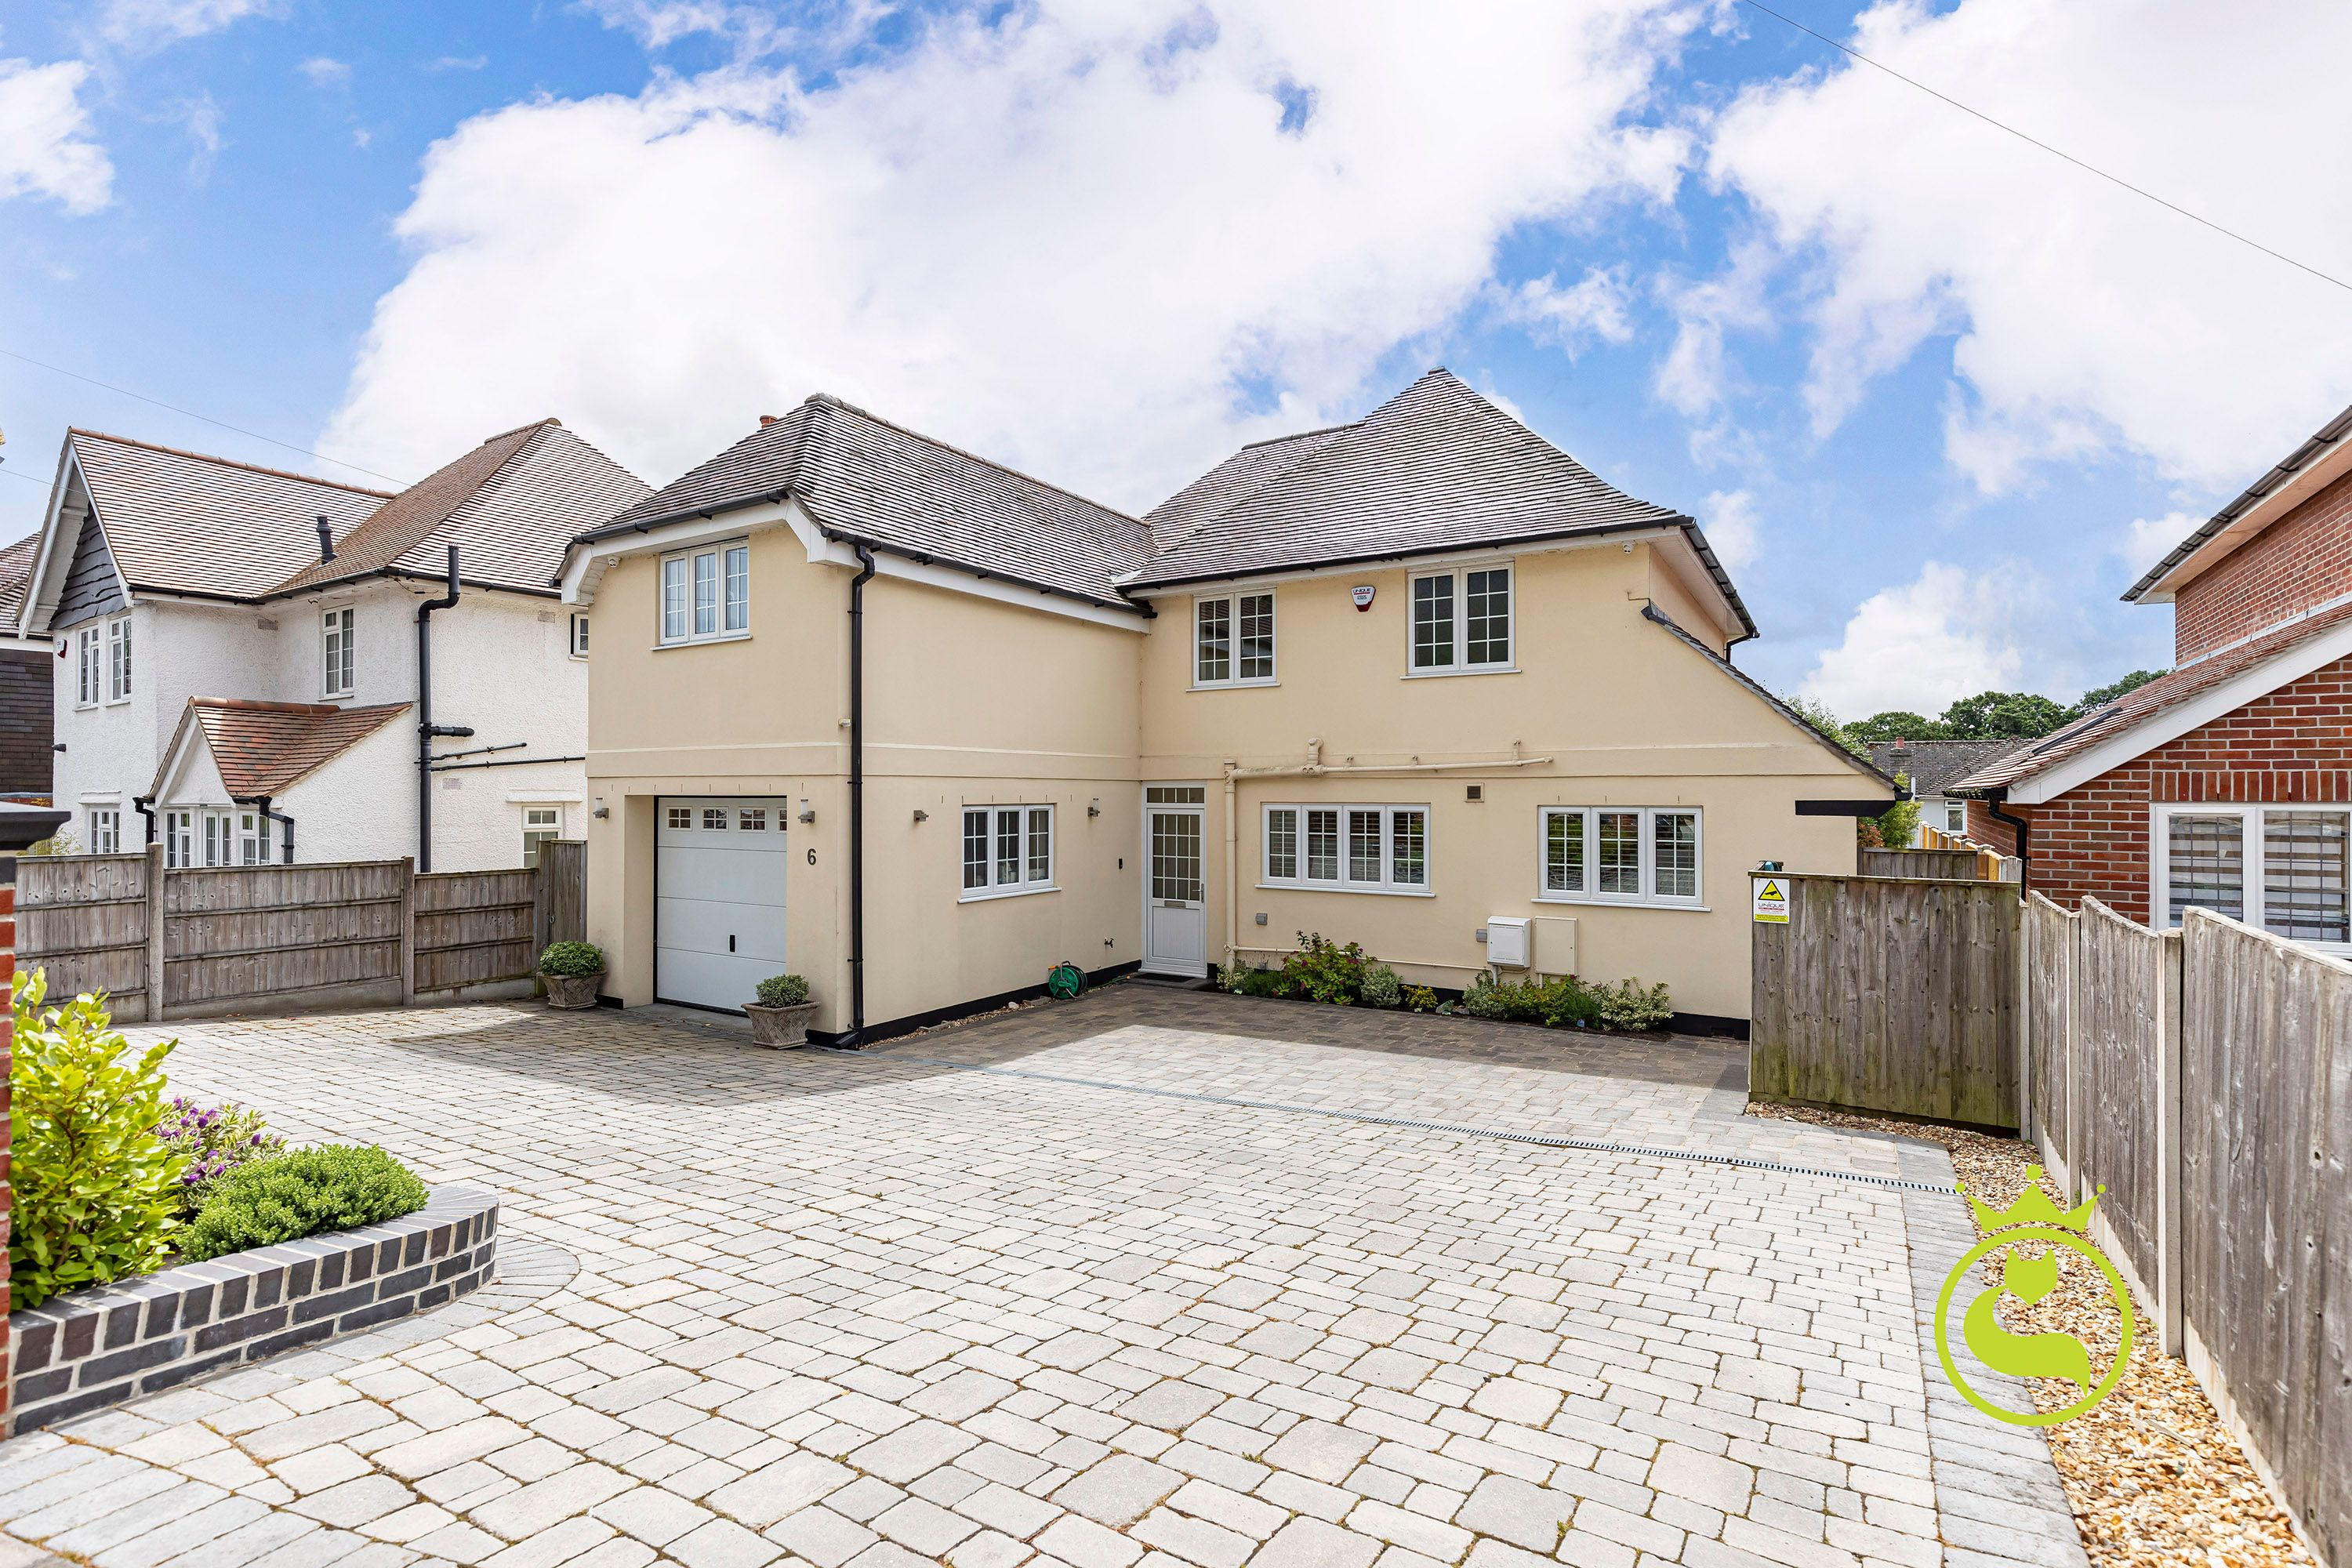 **LAUNCHING SATURDAY 25TH & MONDAY 27TH JUNE  - BY APPOINTMENT ONLY** An exceptionally generous four bedroom, two bathroom detached family home with large southerly facing garden, garage and driveway. Just a short walk to local parks, school, the harbour side and Ashley Cross.